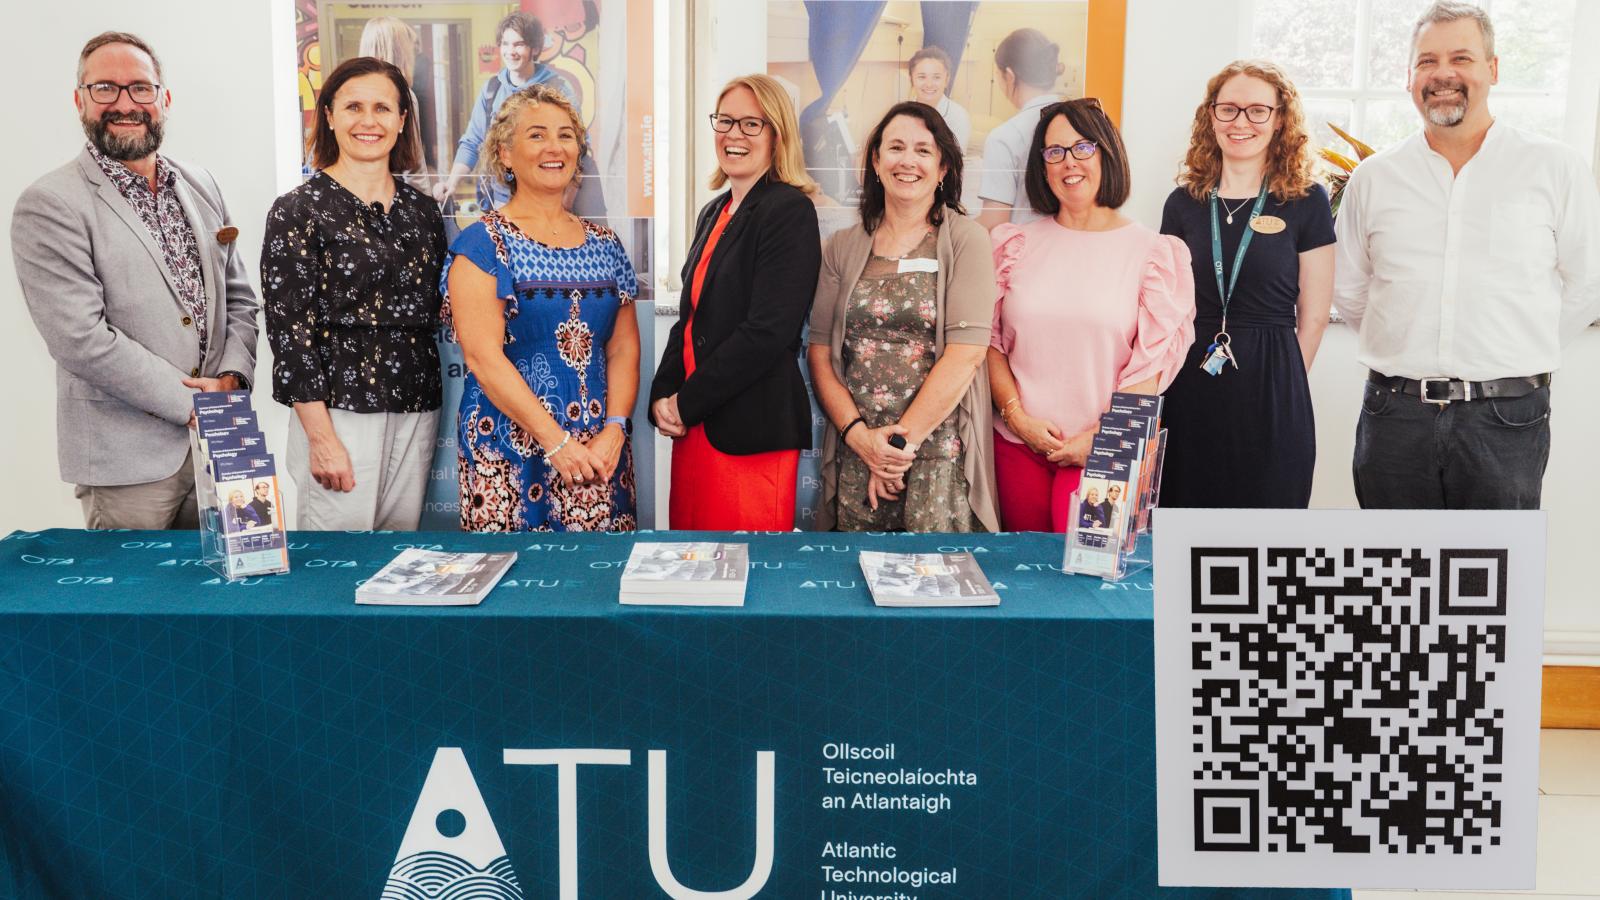 ATU networking event psychology practitioners- 22.06.23